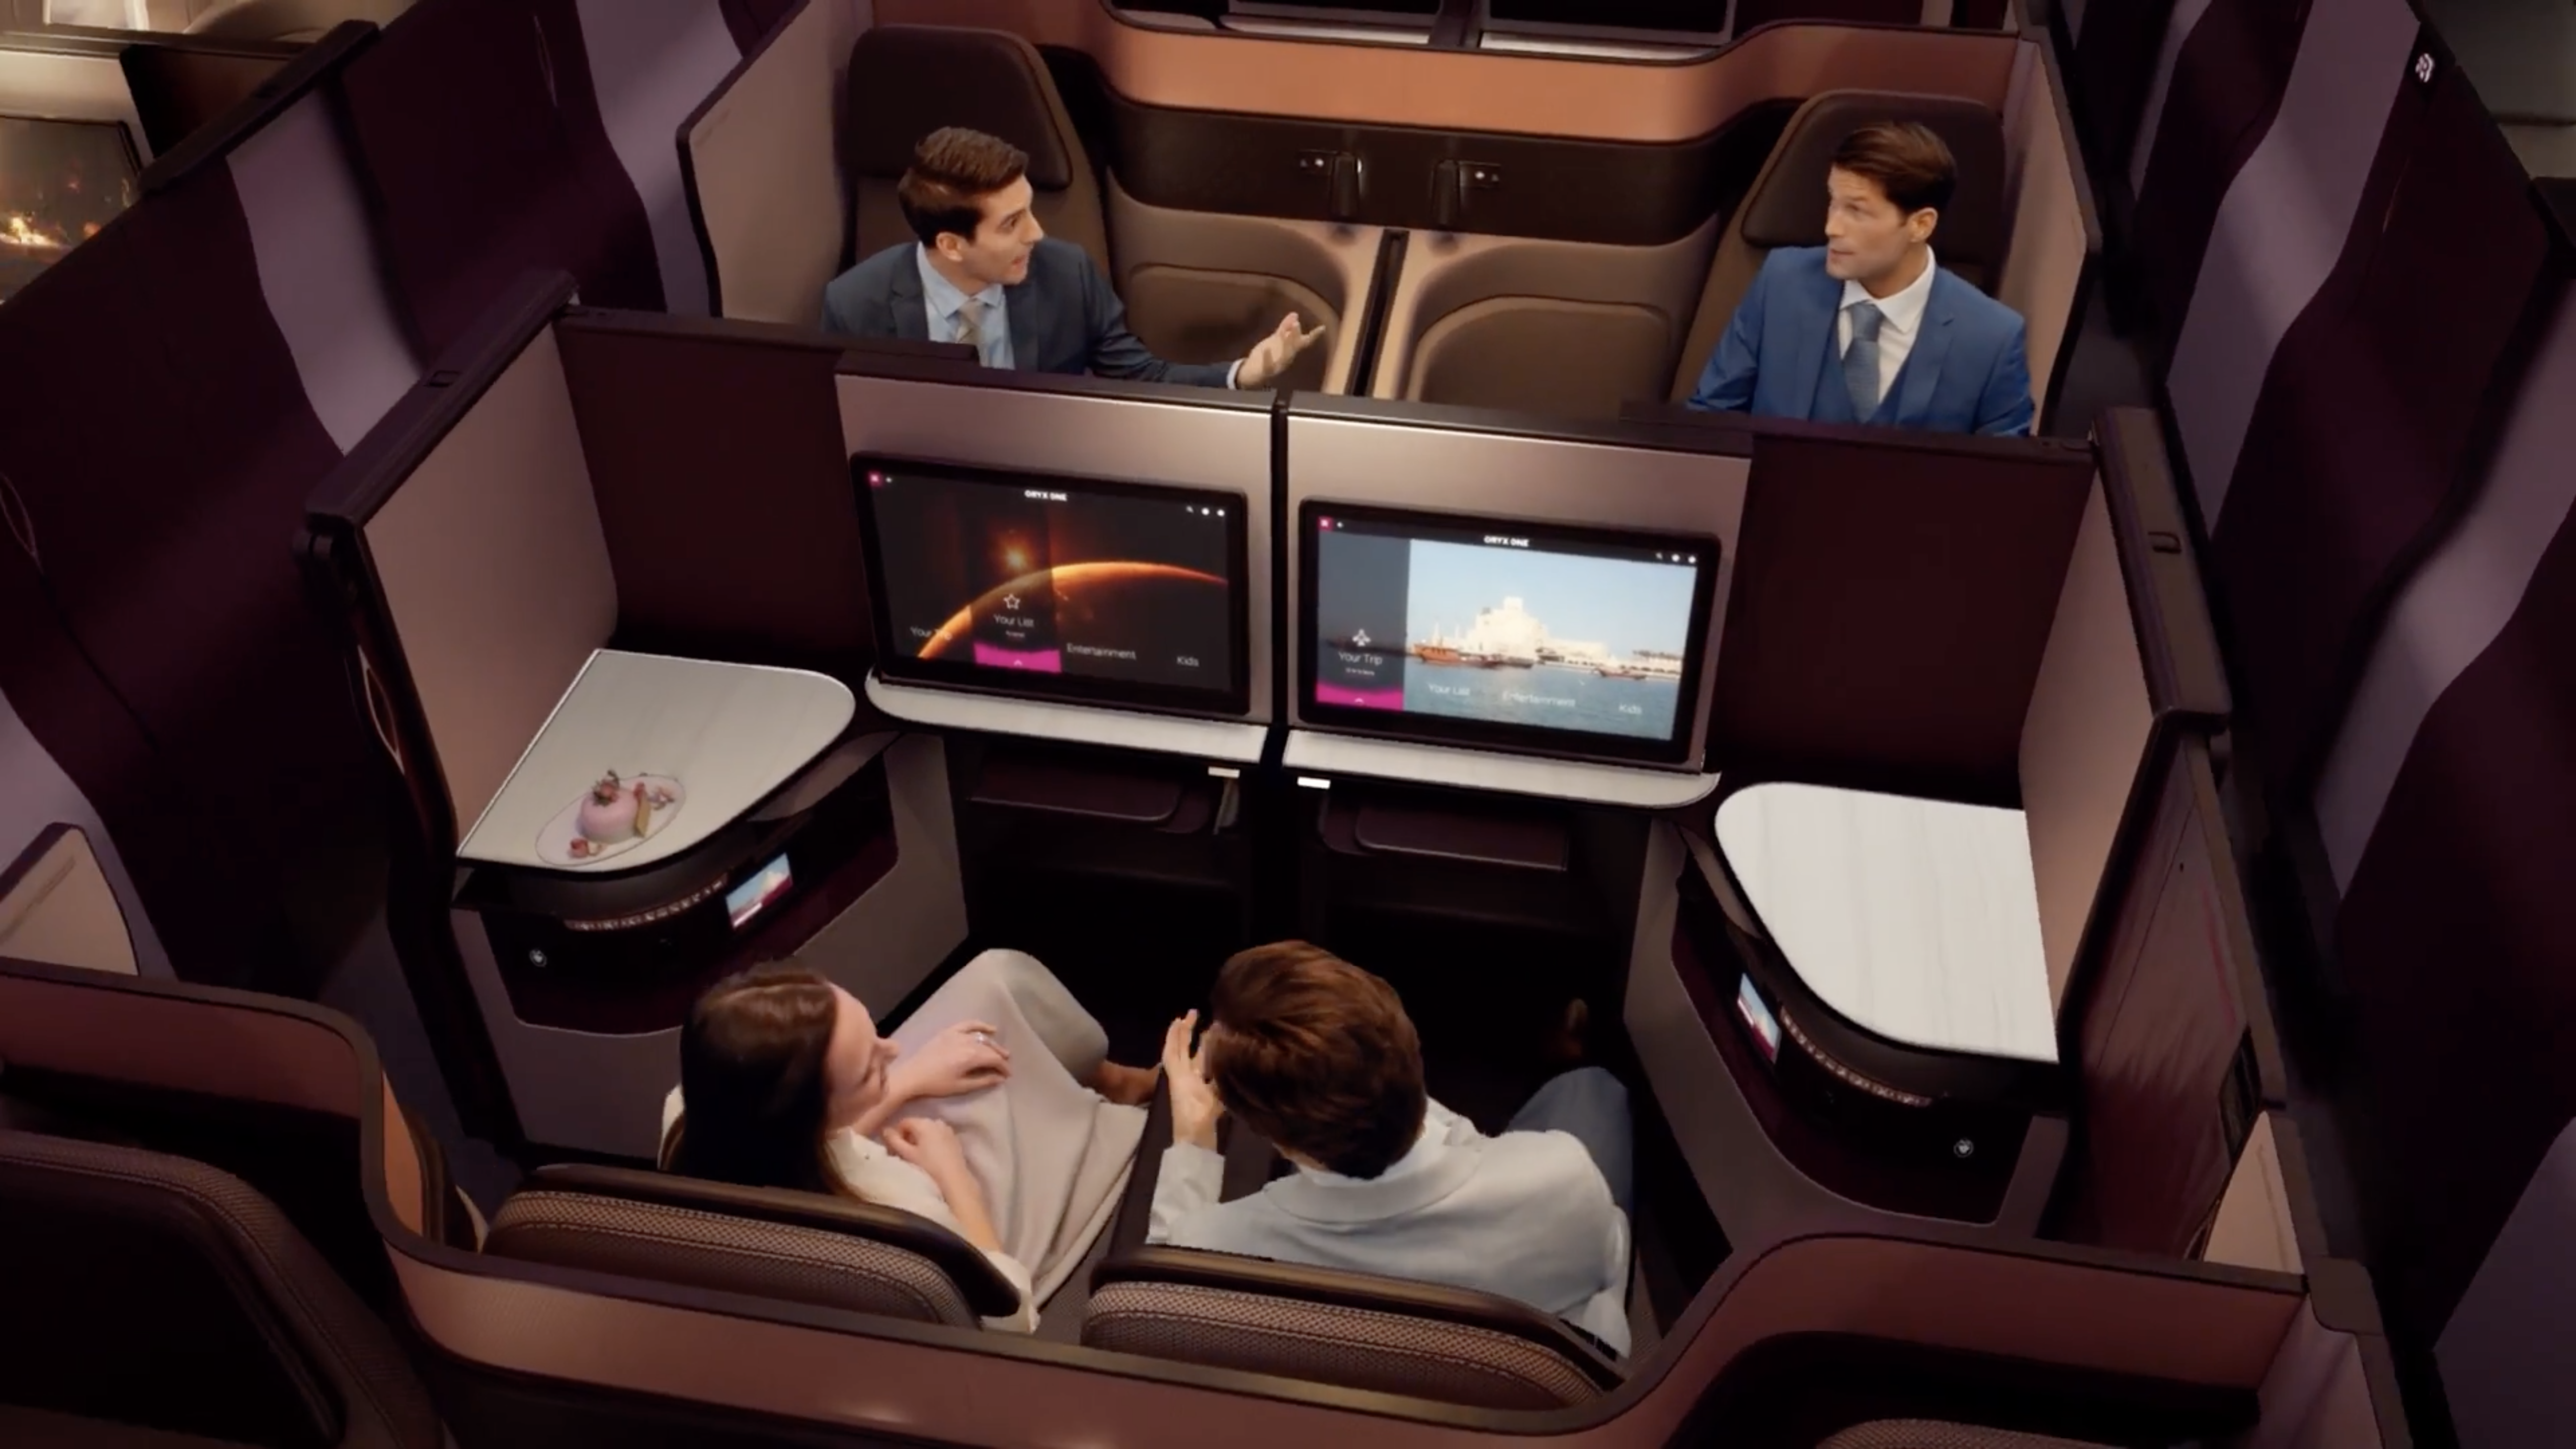 a group of people sitting in chairs in a business class